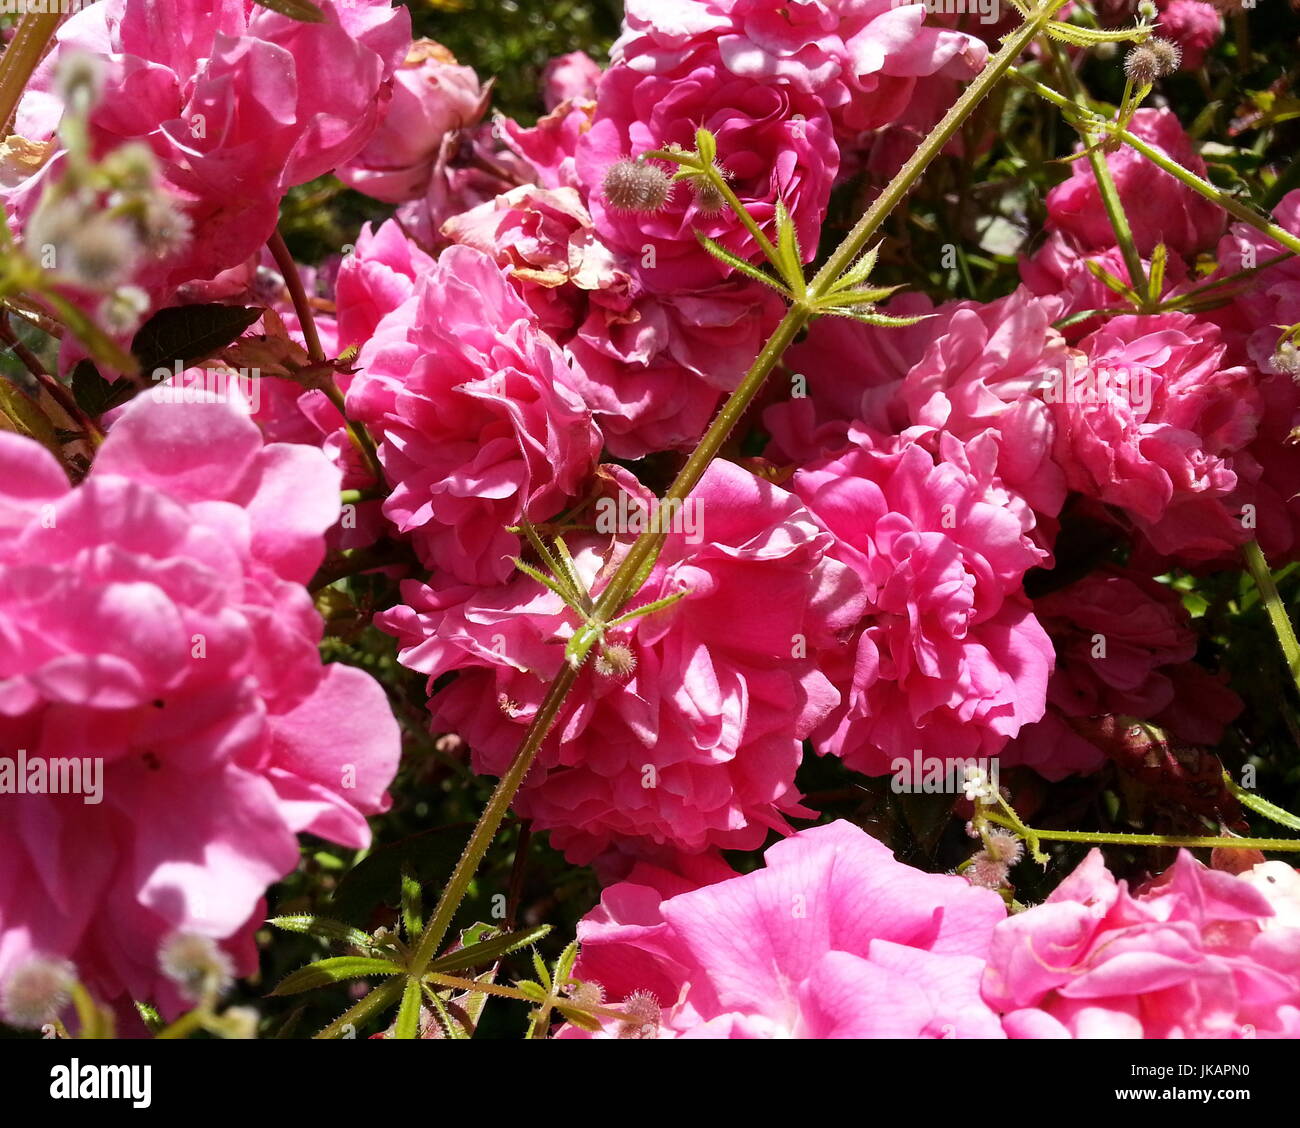 Pink Flowers on a Vine Stock Photo